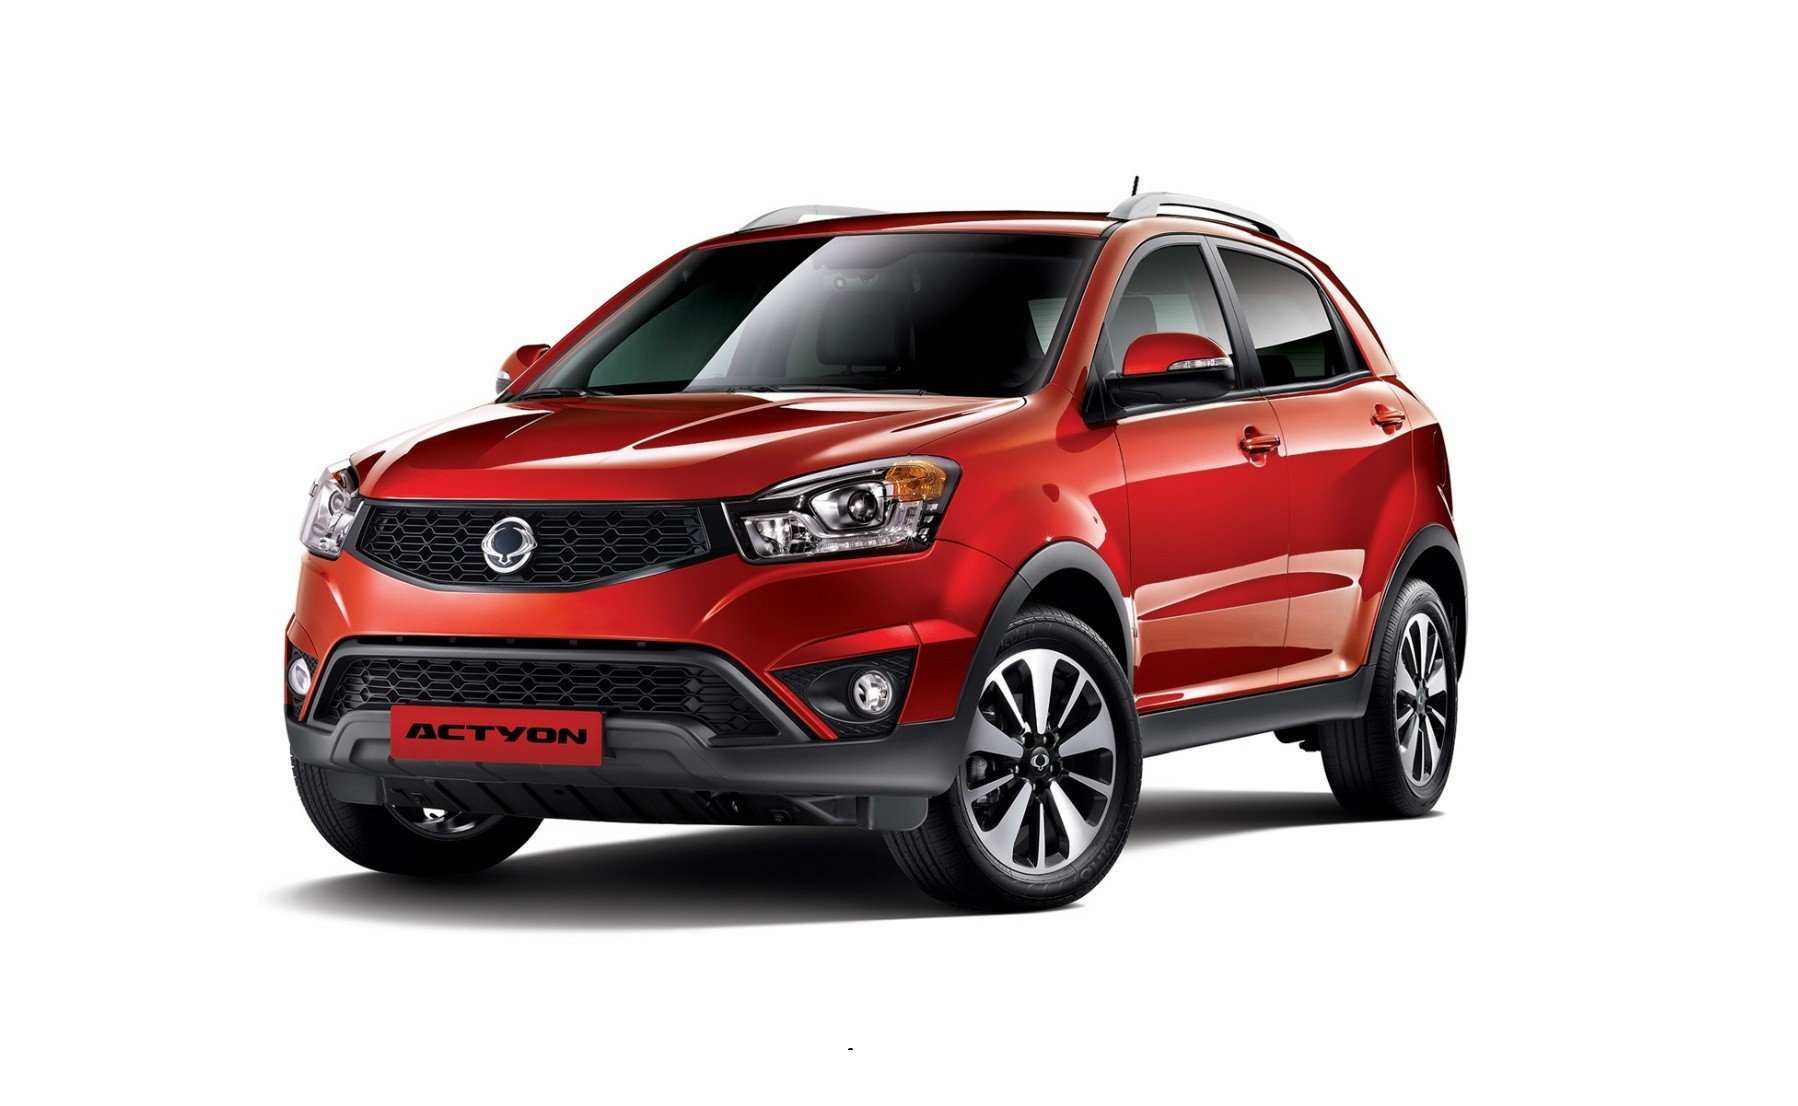 Санг енг актион 2013 бензин. SSANGYONG Actyon II. SSANGYOUNG Act. SSANGYONG Actyon 2013. SSANGYONG Actyon New 2022.